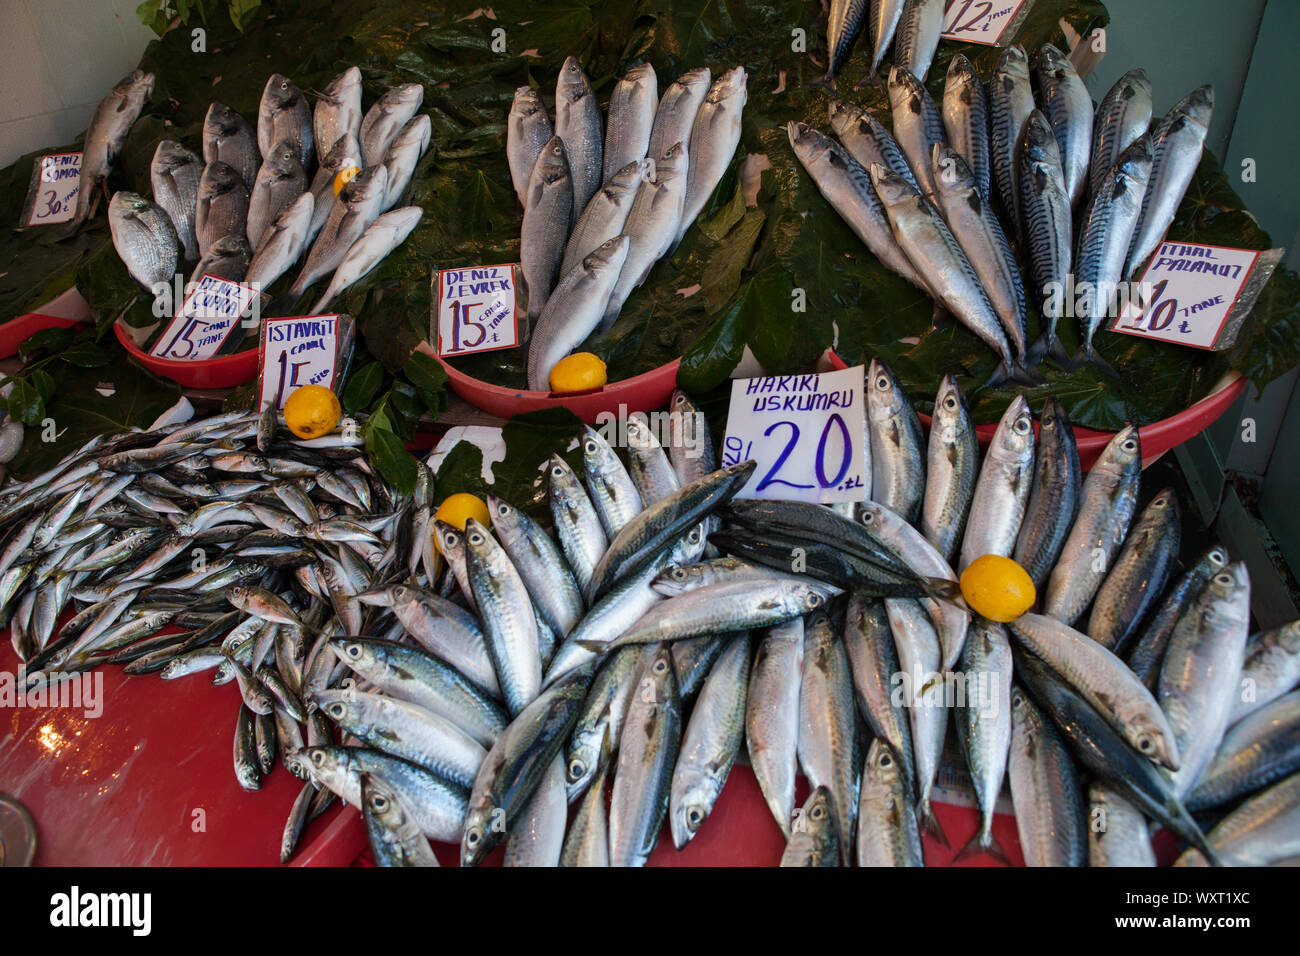 Display of fish for sale at the market in the Beyoğlu district of Istanbul, Turkey Stock Photo